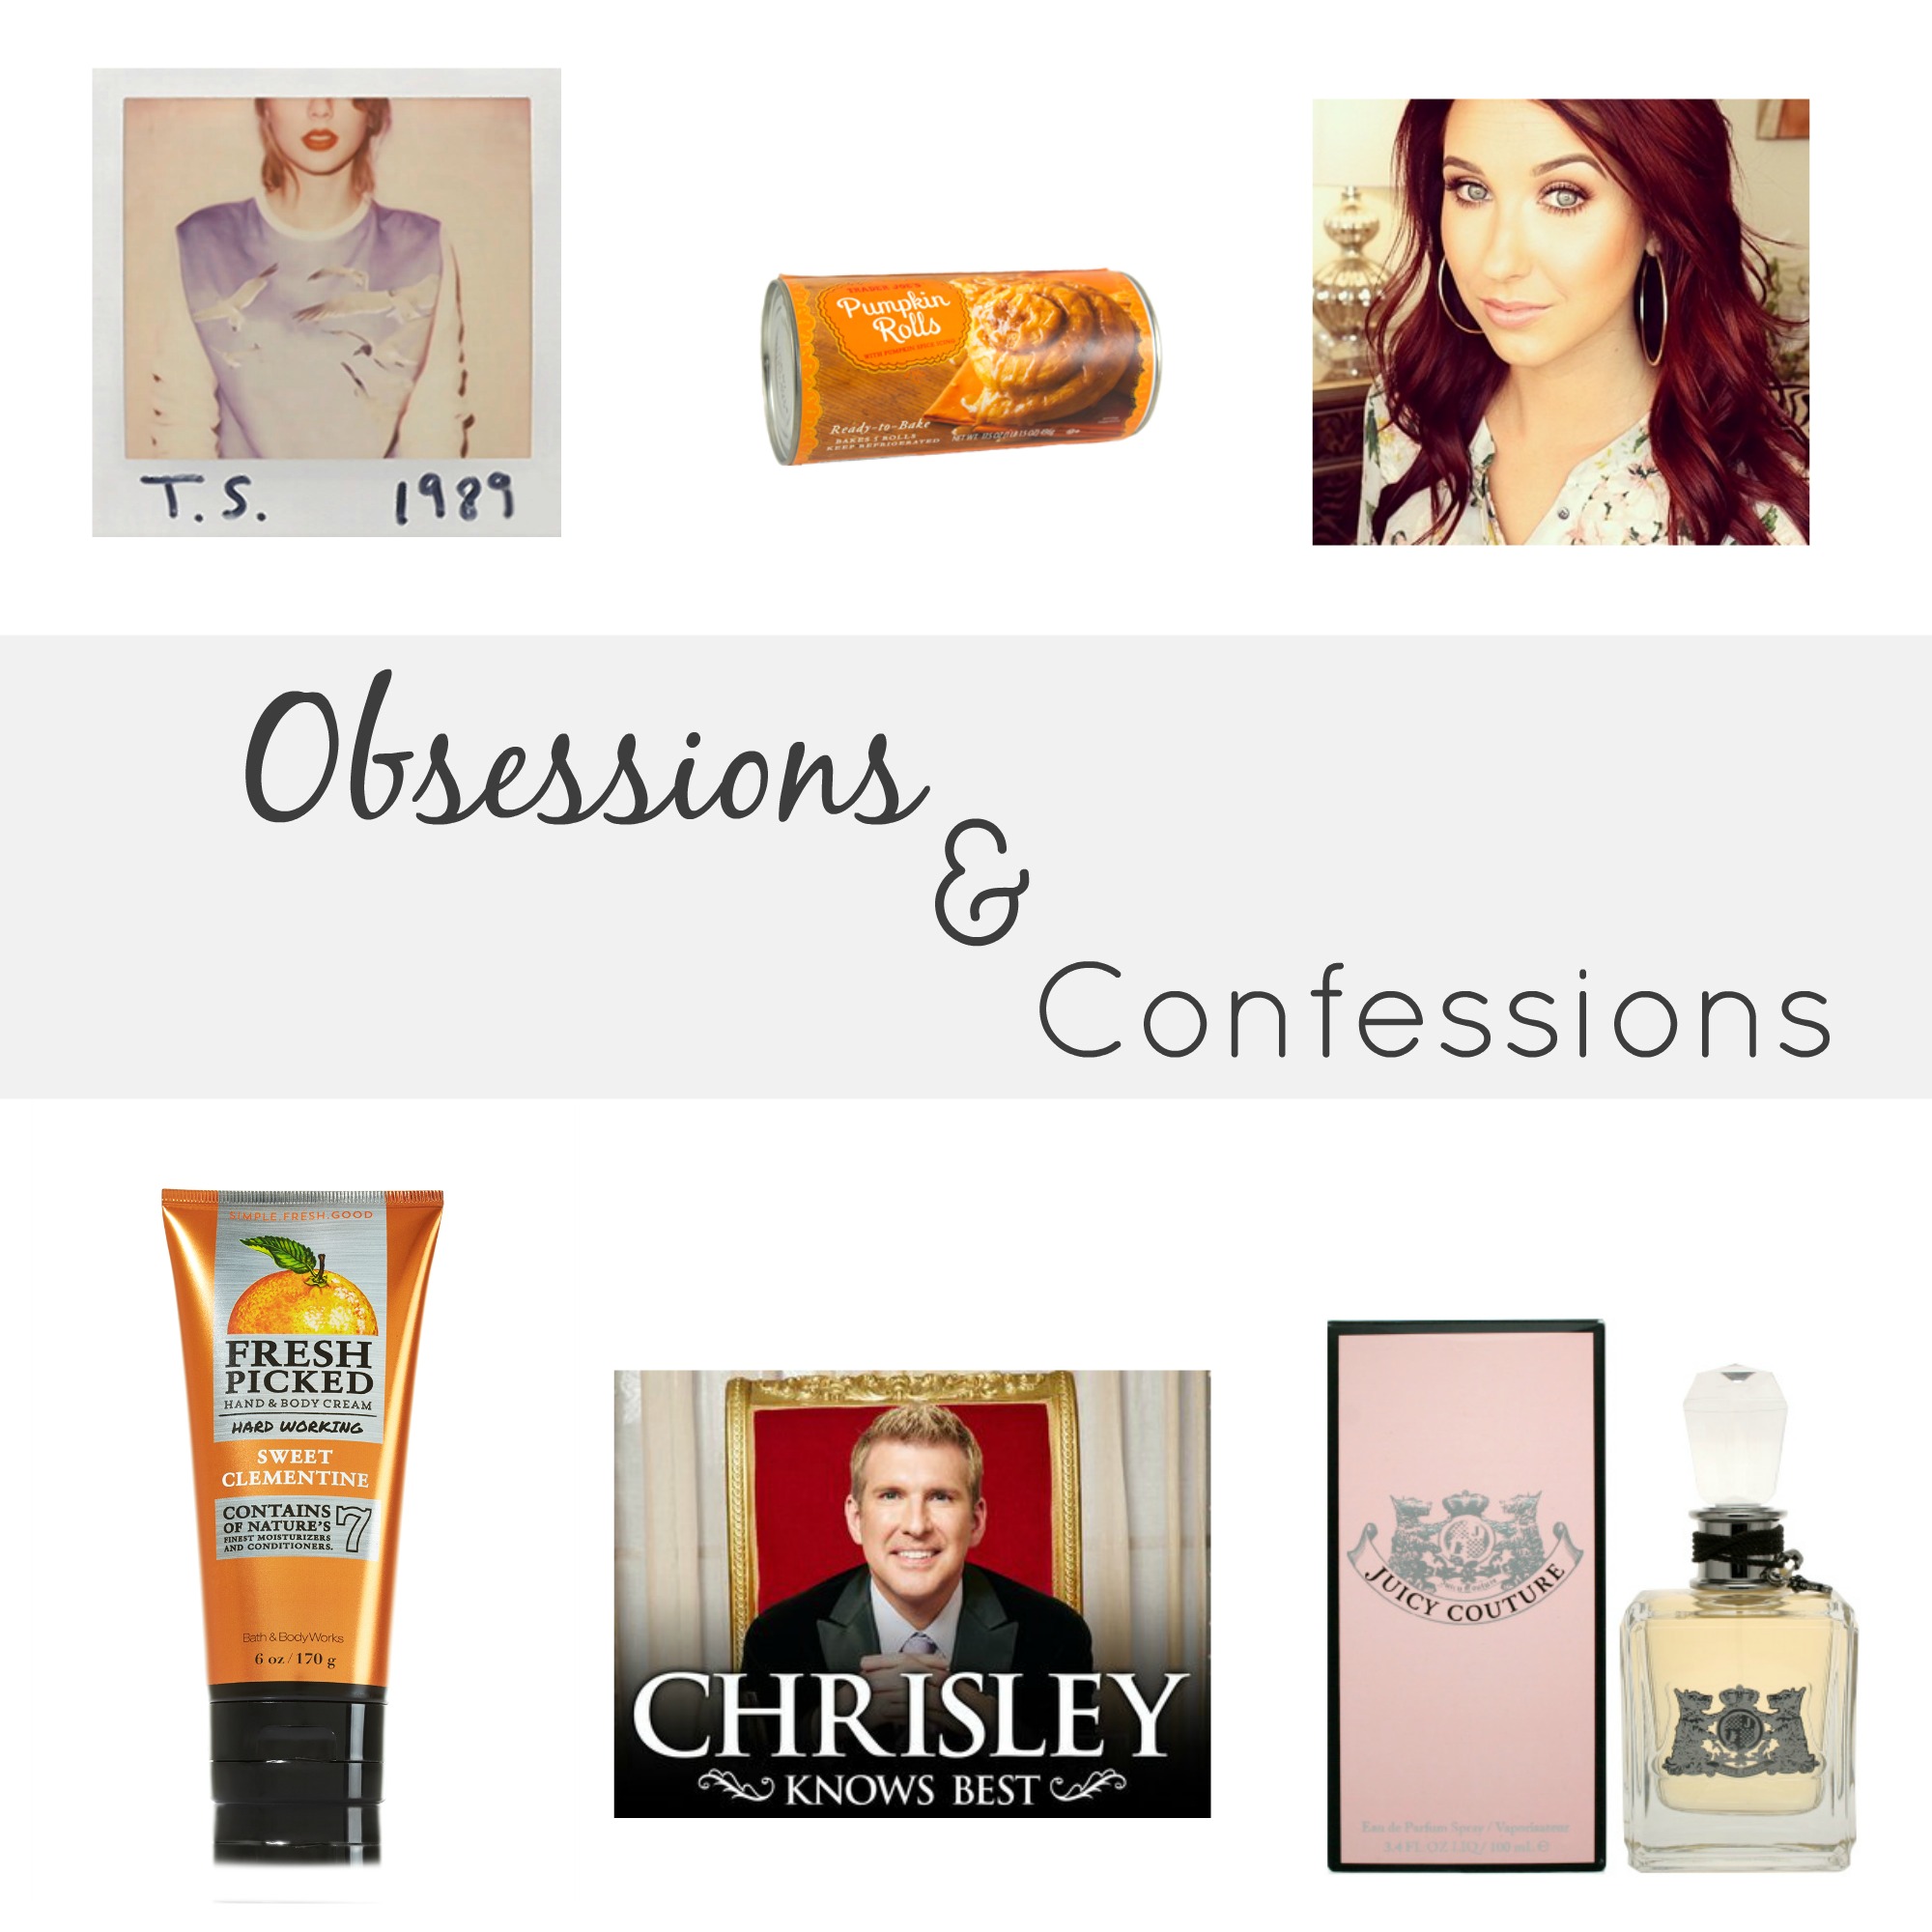 Obsessions and Confessions